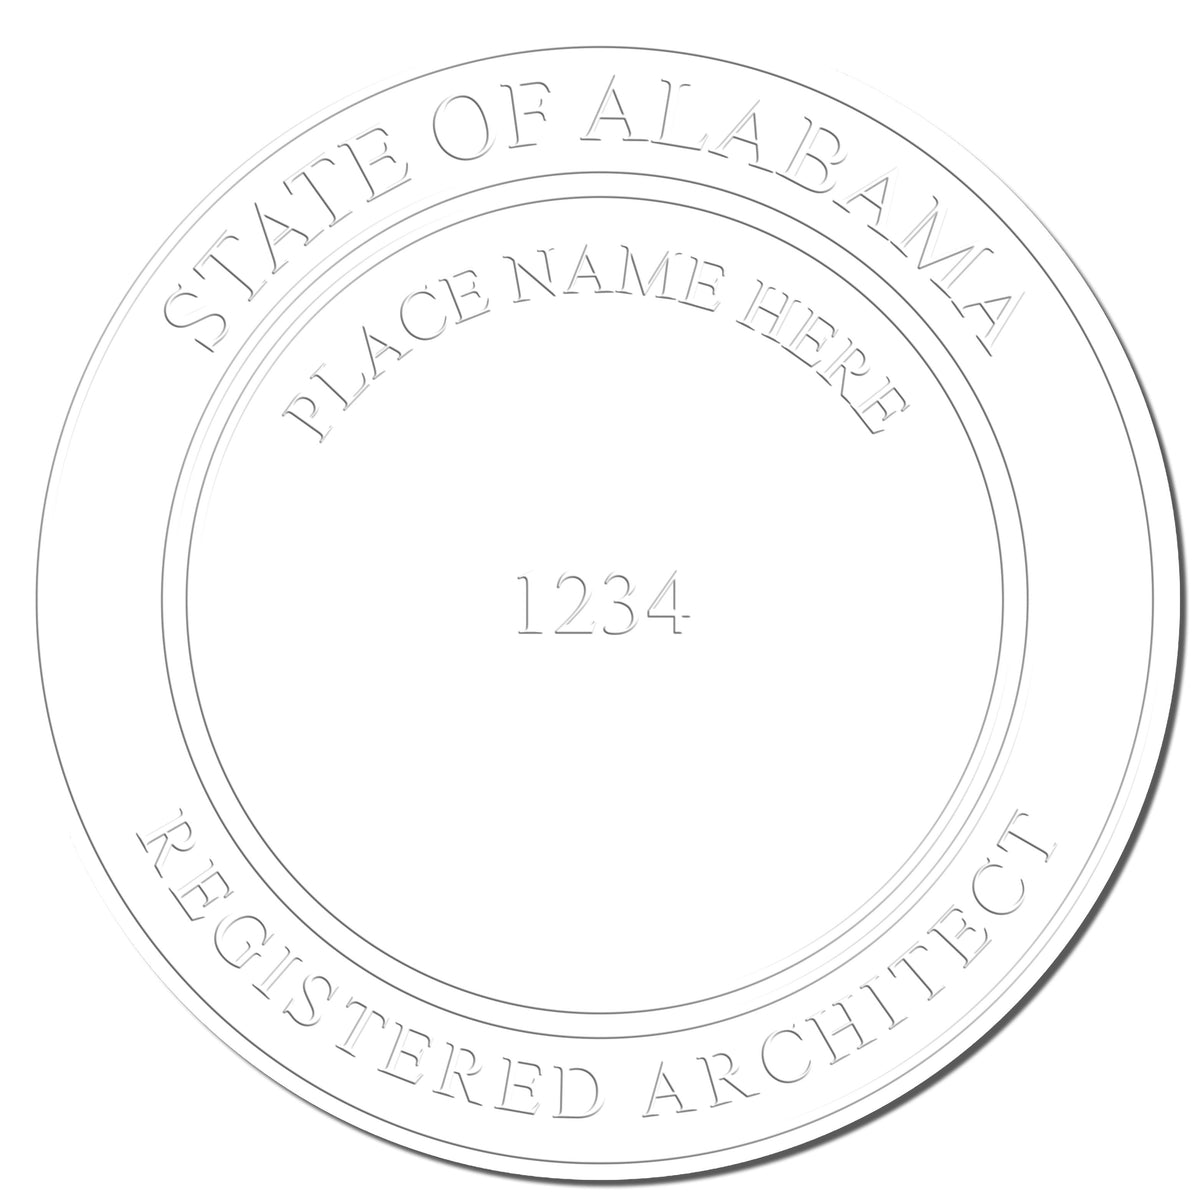 This paper is stamped with a sample imprint of the Heavy Duty Cast Iron Alabama Architect Embosser, signifying its quality and reliability.